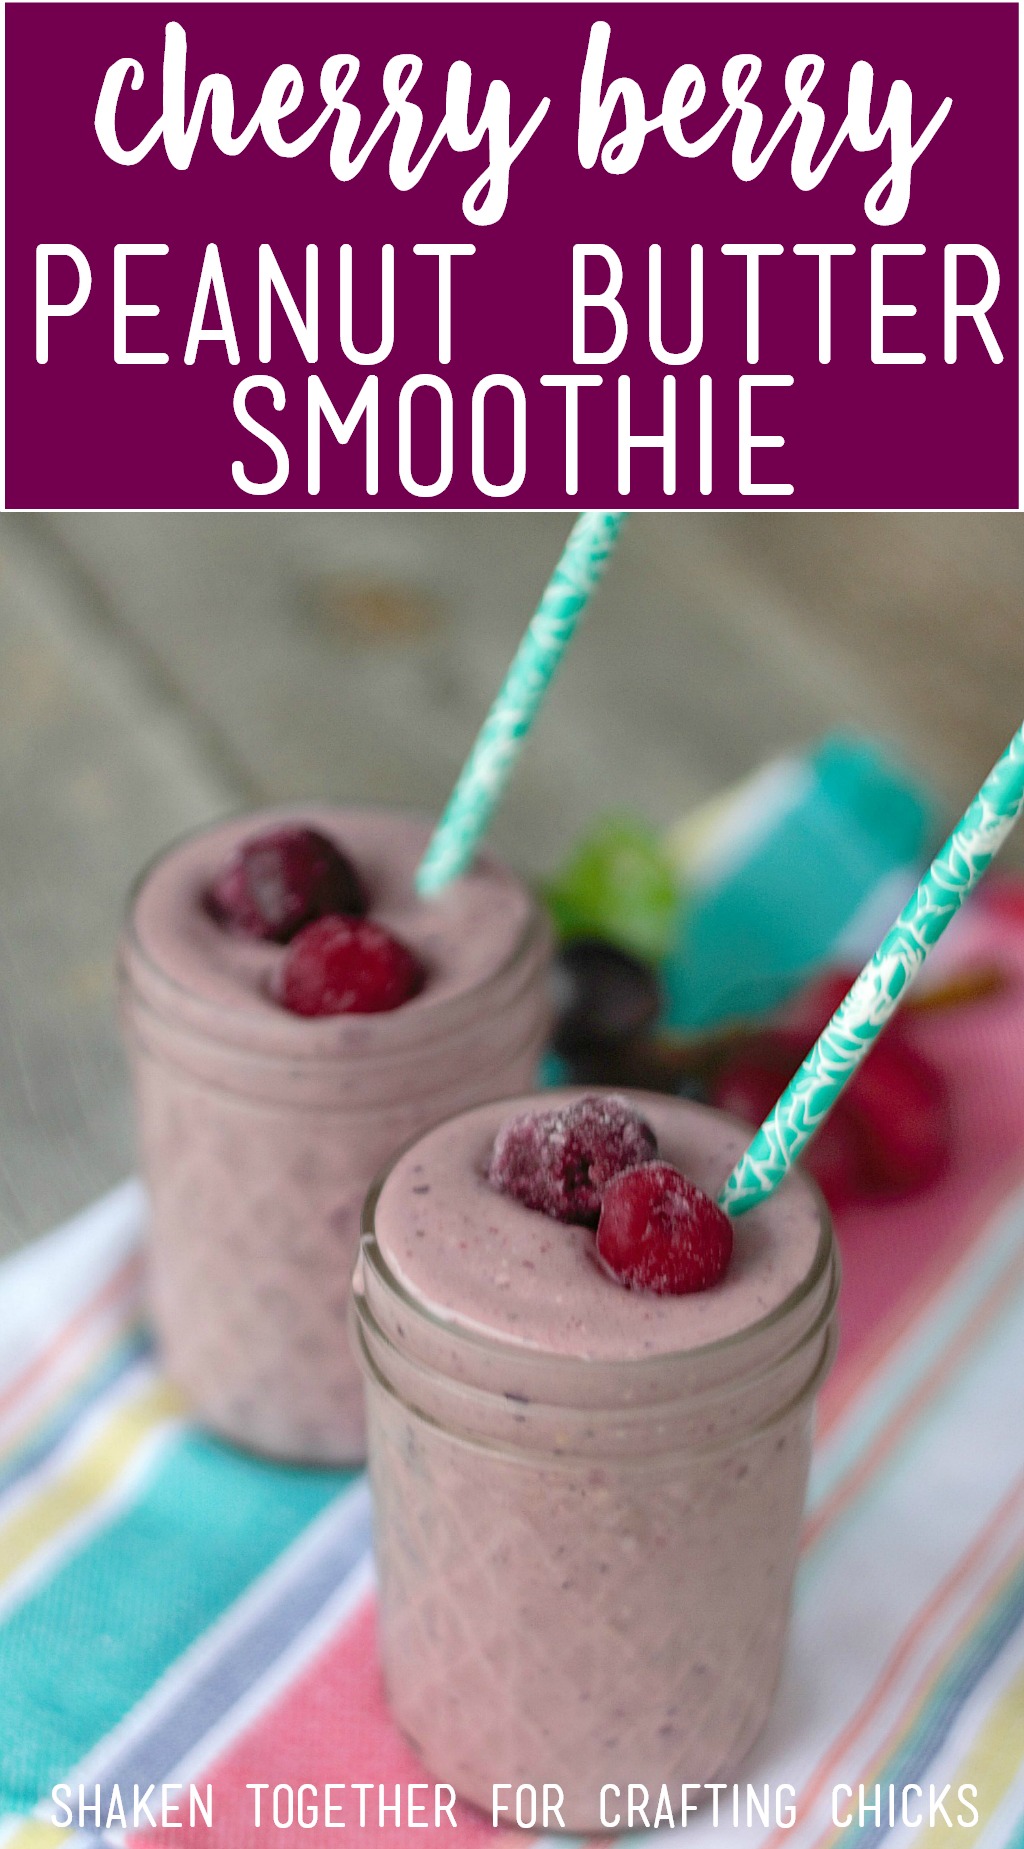 Make a Cherry Berry Peanut Butter Smoothie for a fruity, healthy & delicious start to the new year!